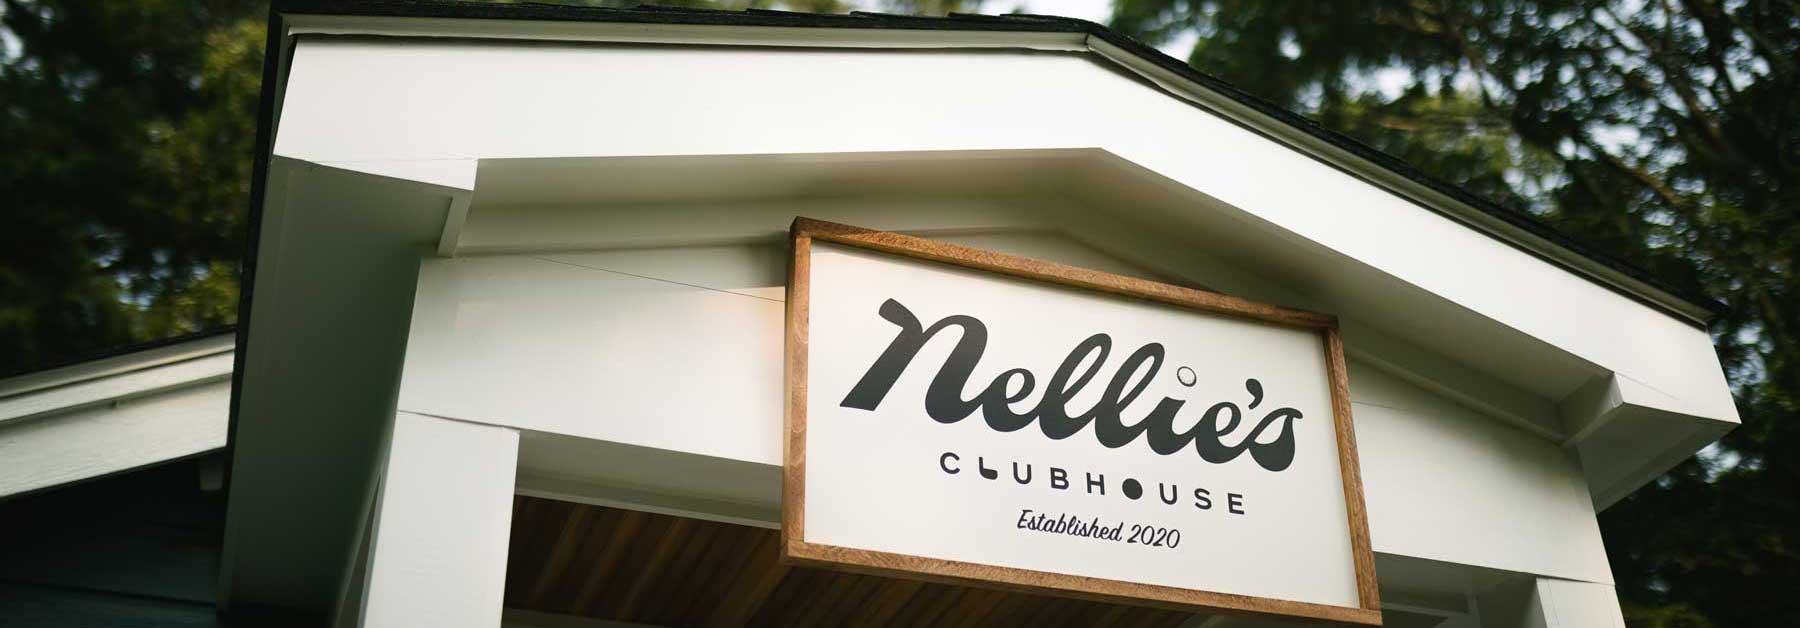 Nellies Clubhouse Sign